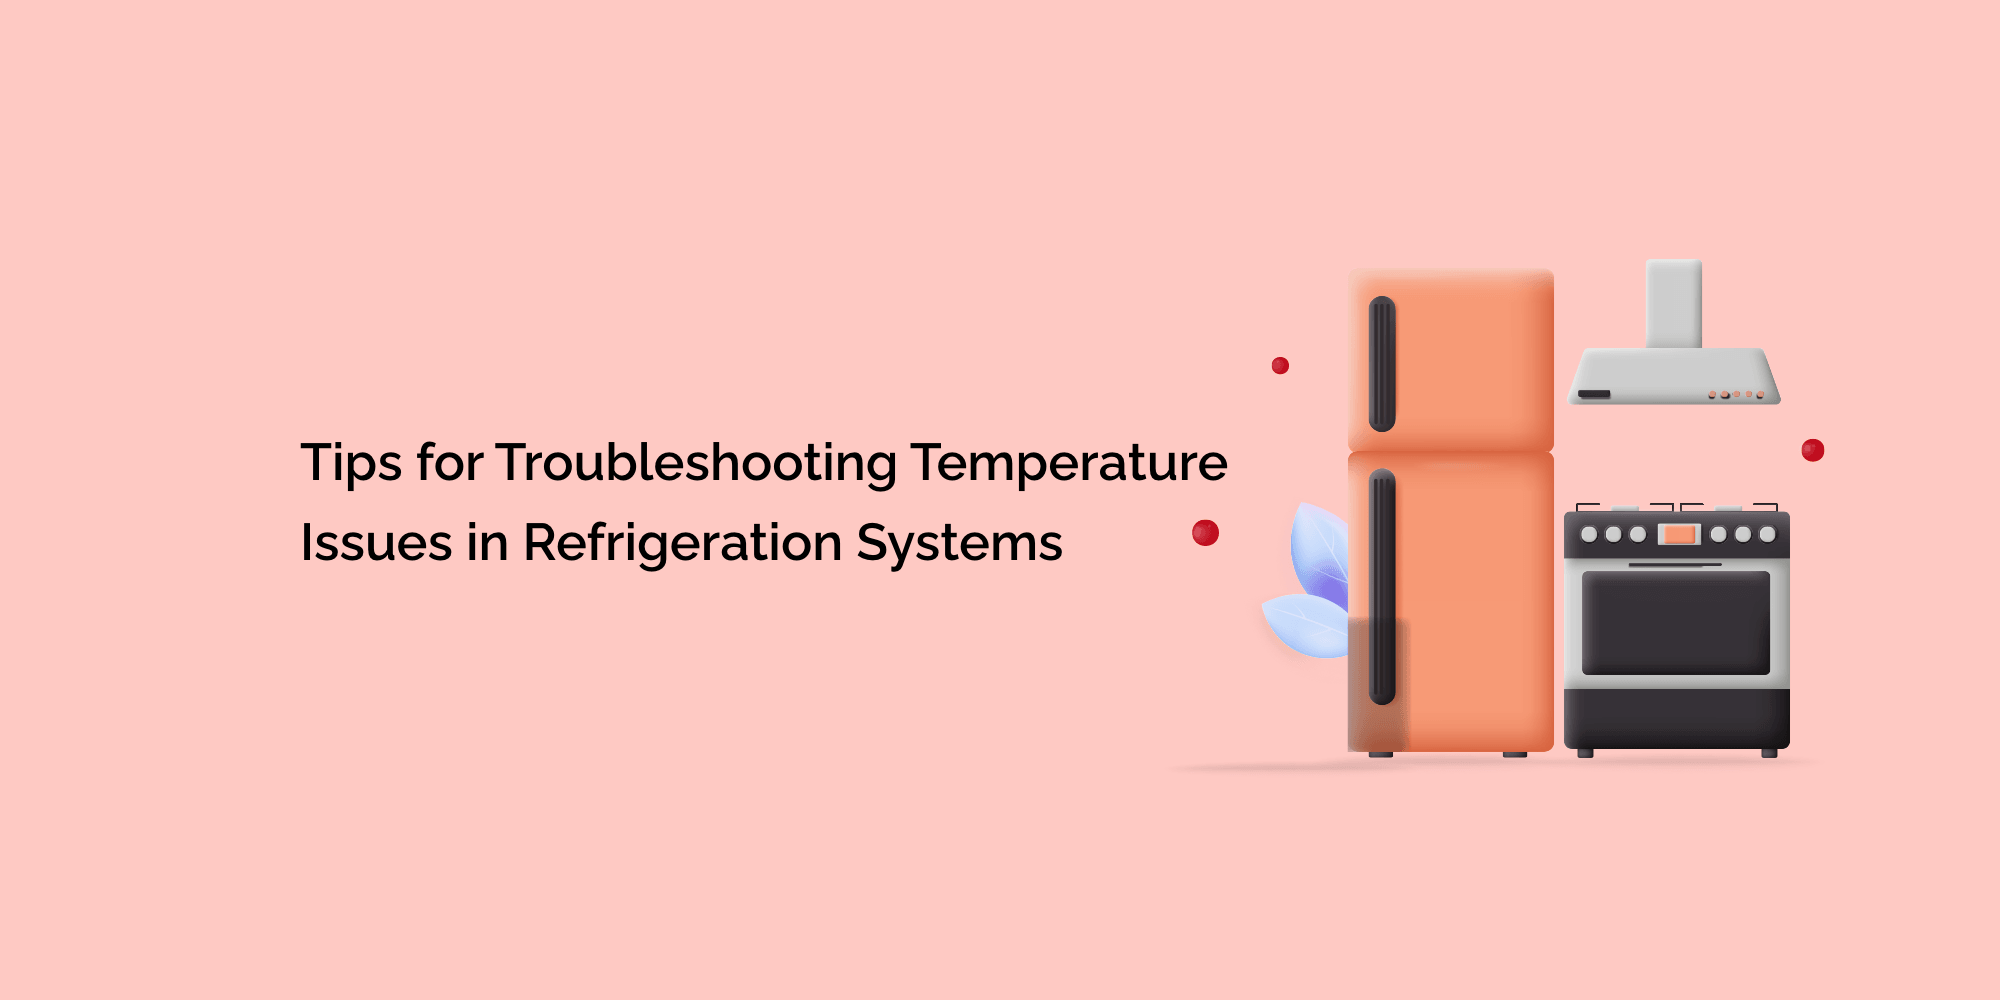 Tips for Troubleshooting Temperature Issues in Refrigeration Systems